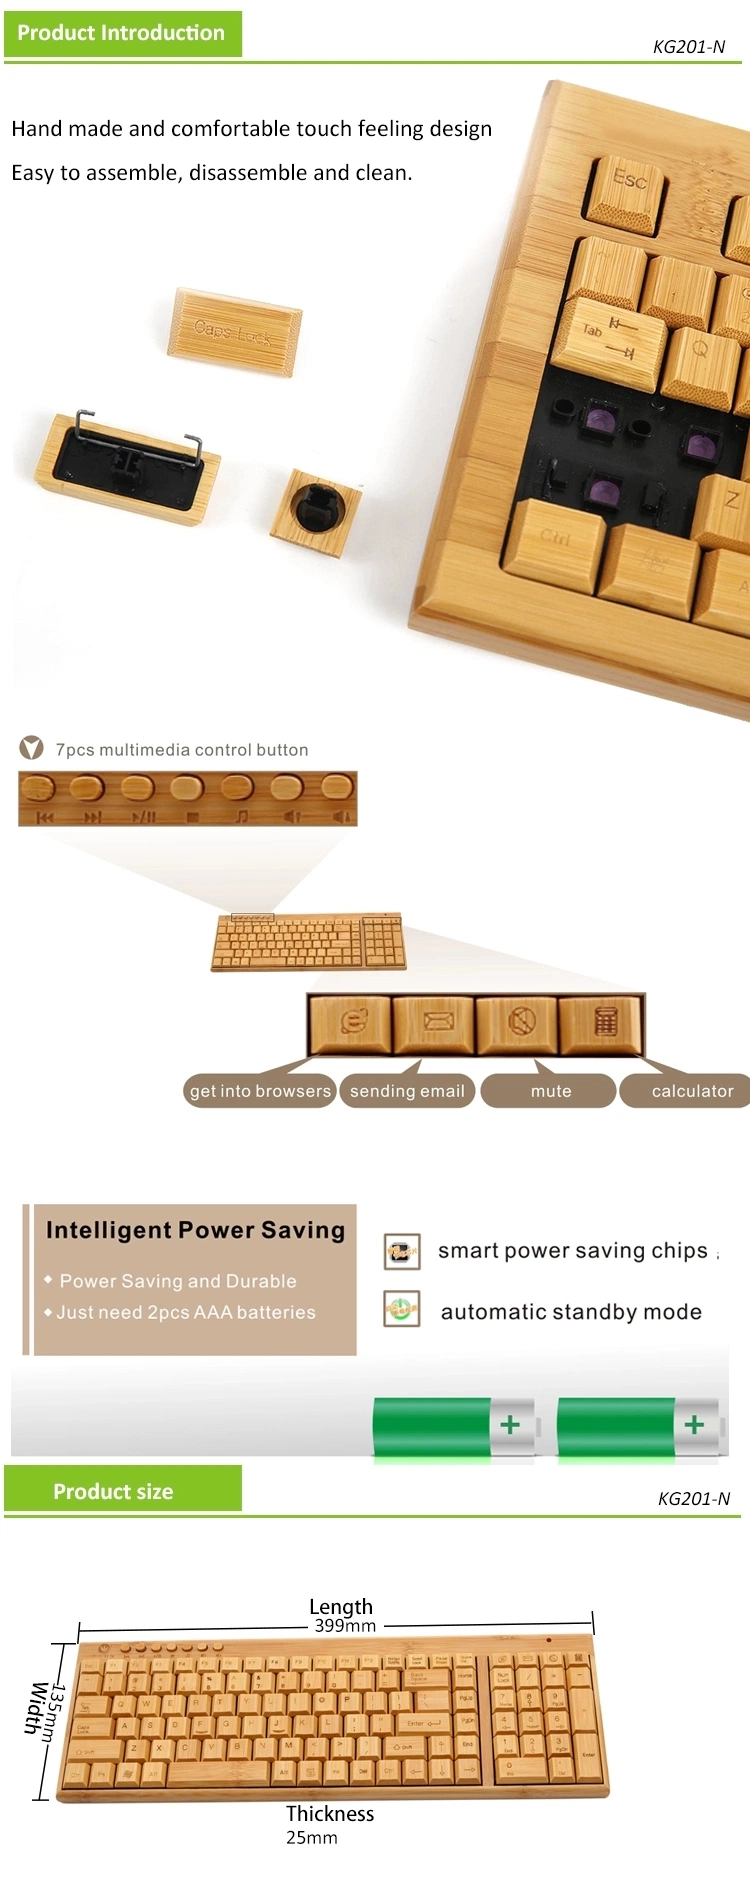 The Bamboo Wireless Keyboard and Mouse for Office